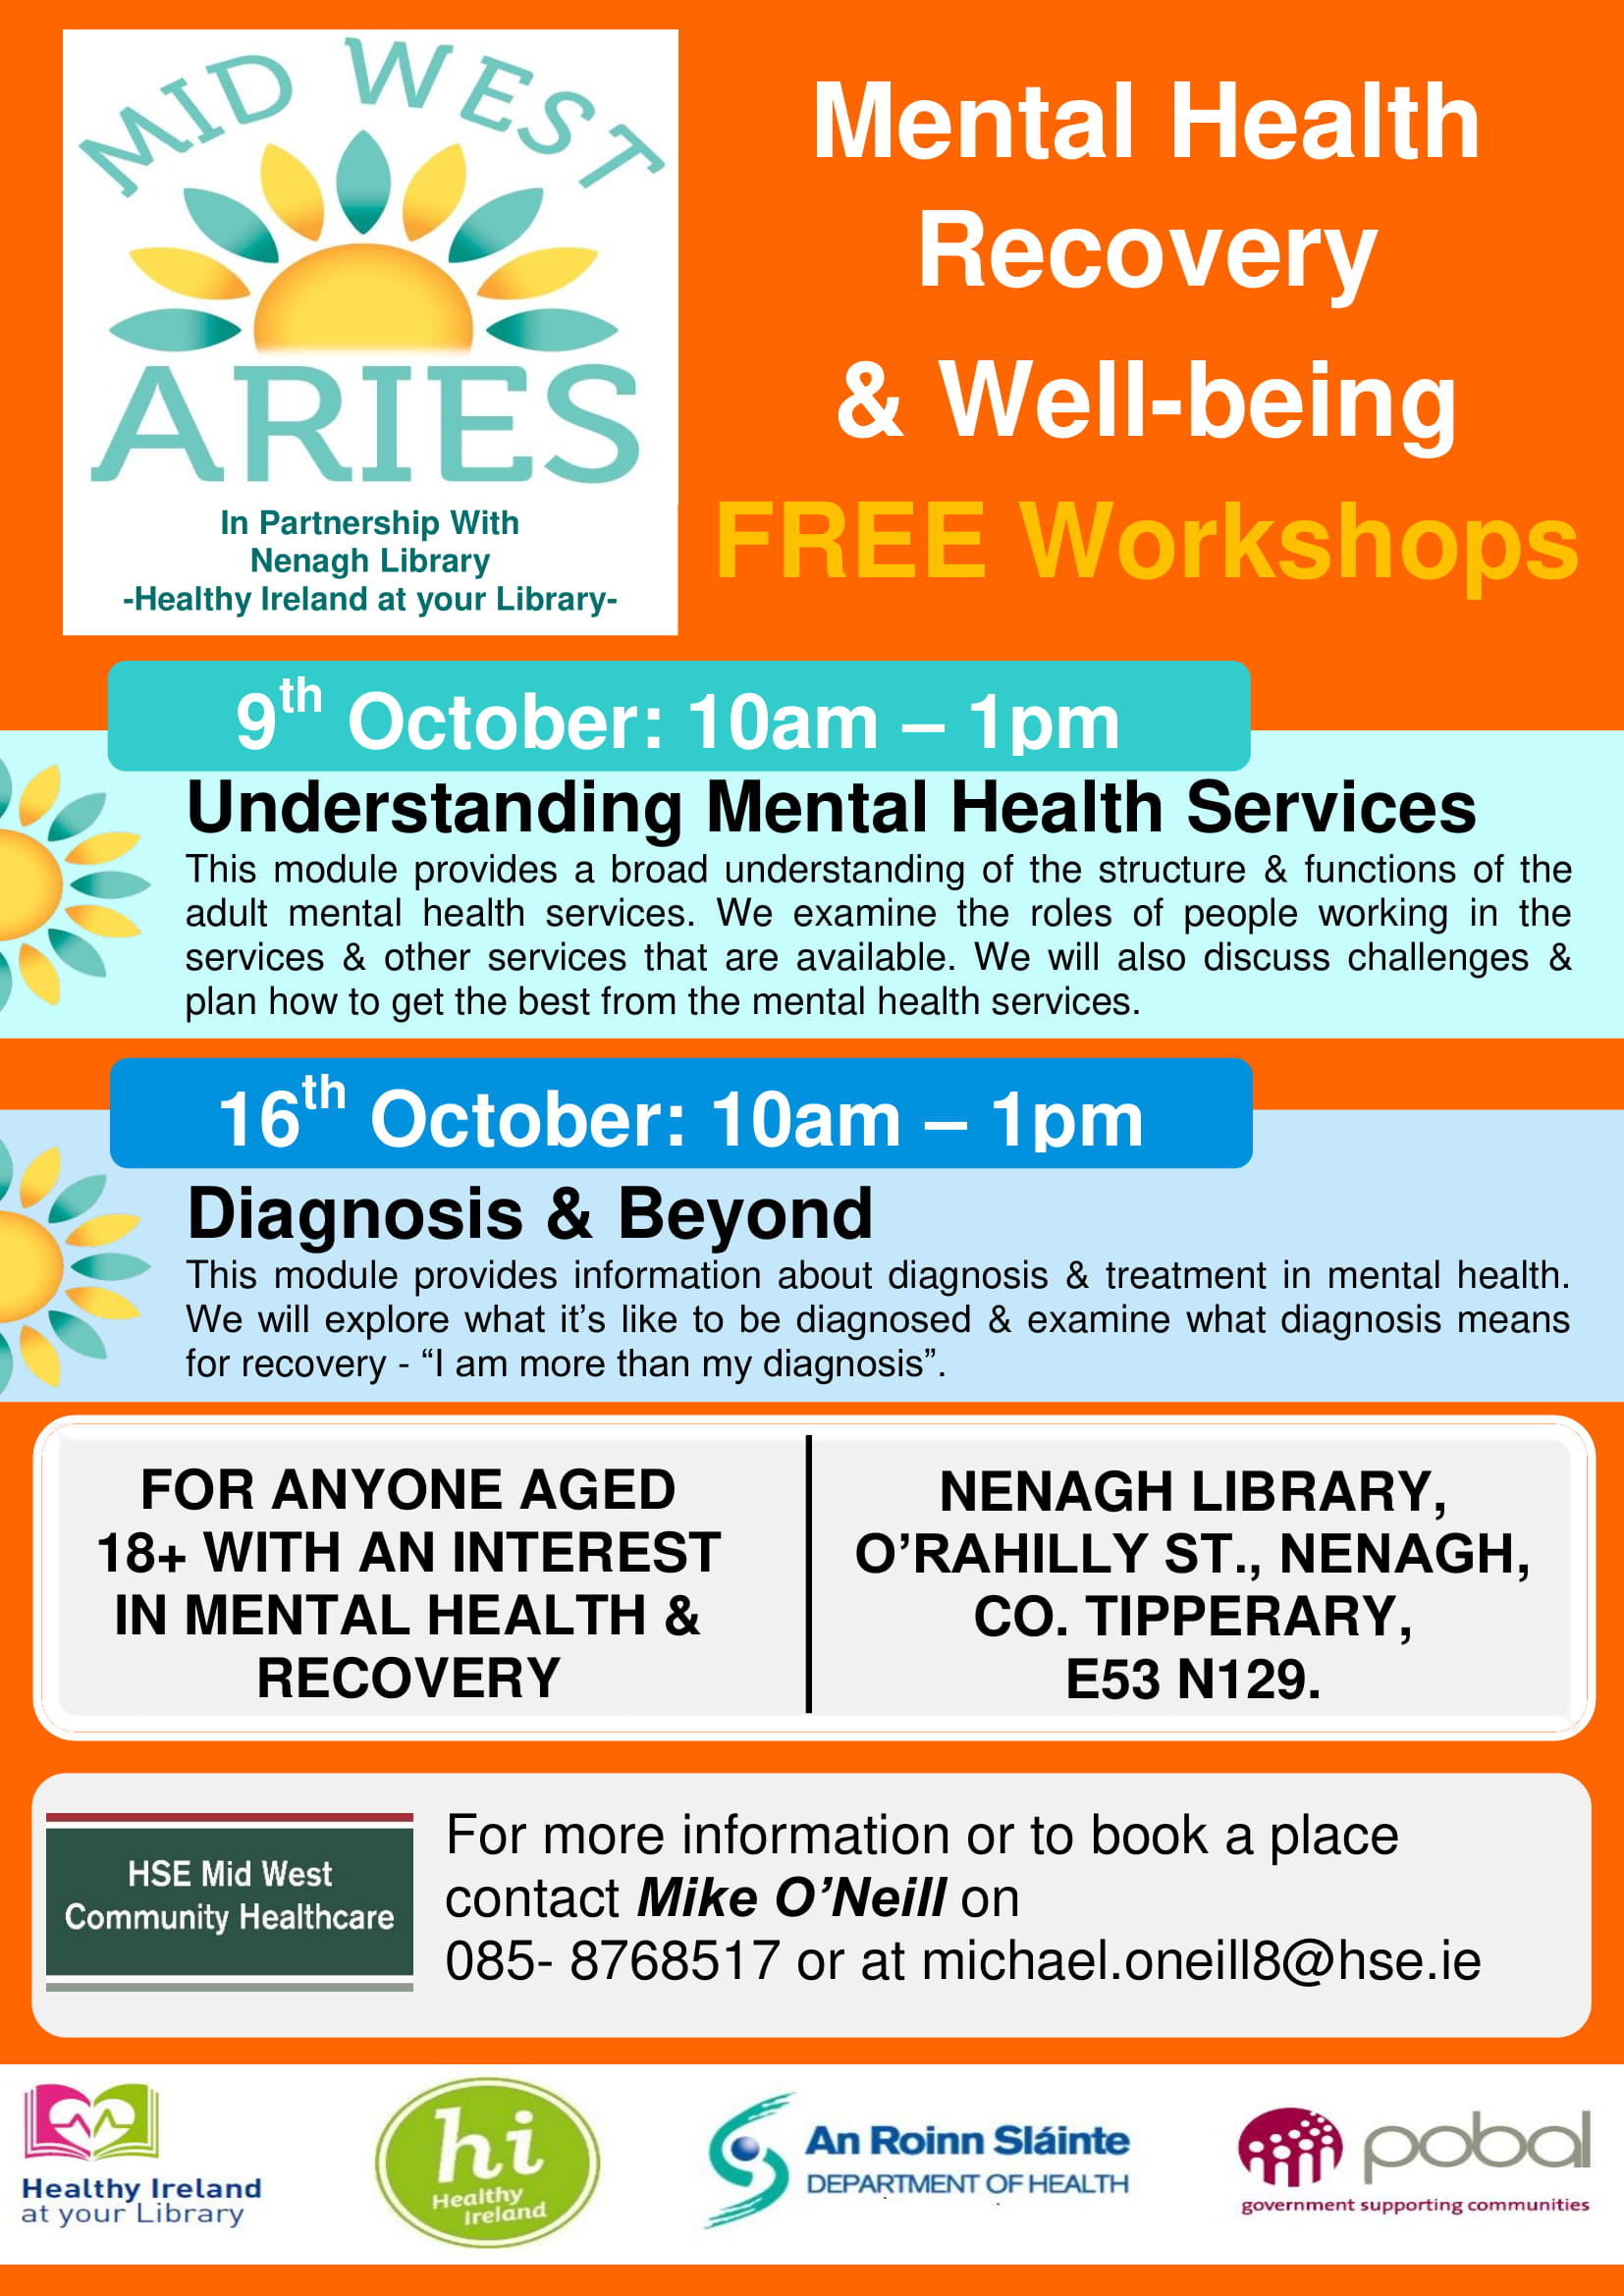 Mental Health Recovery & Well-being FREE Workshops 